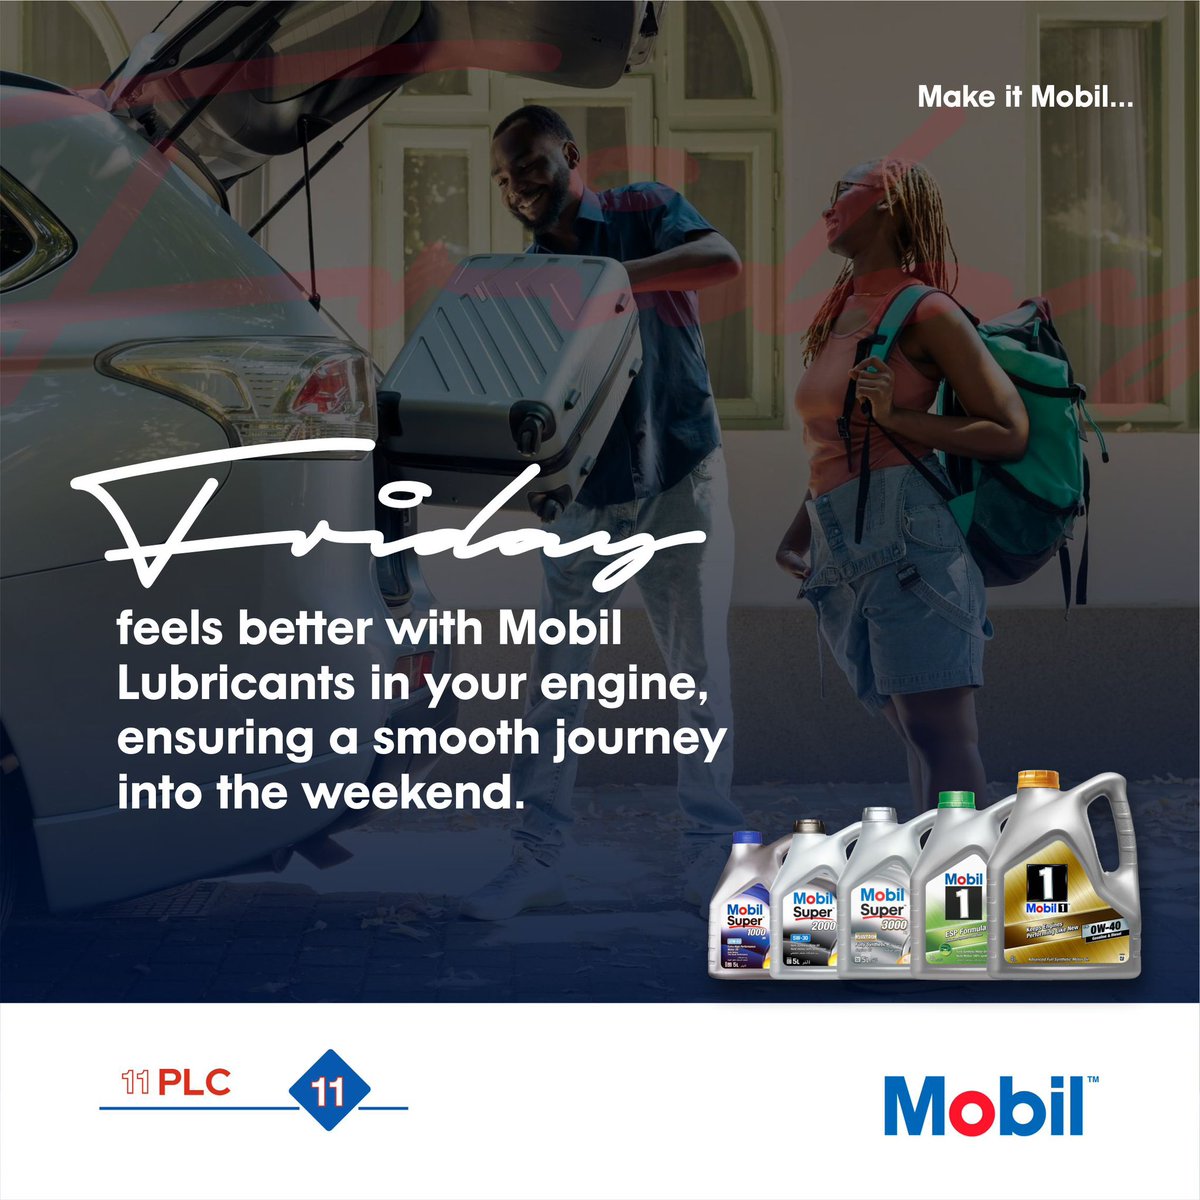 Kickstart your weekend with Mobil Lubricants in your engine for a smooth ride ahead.

#fridayfeeling #mobillubricants #mobilinnigeria